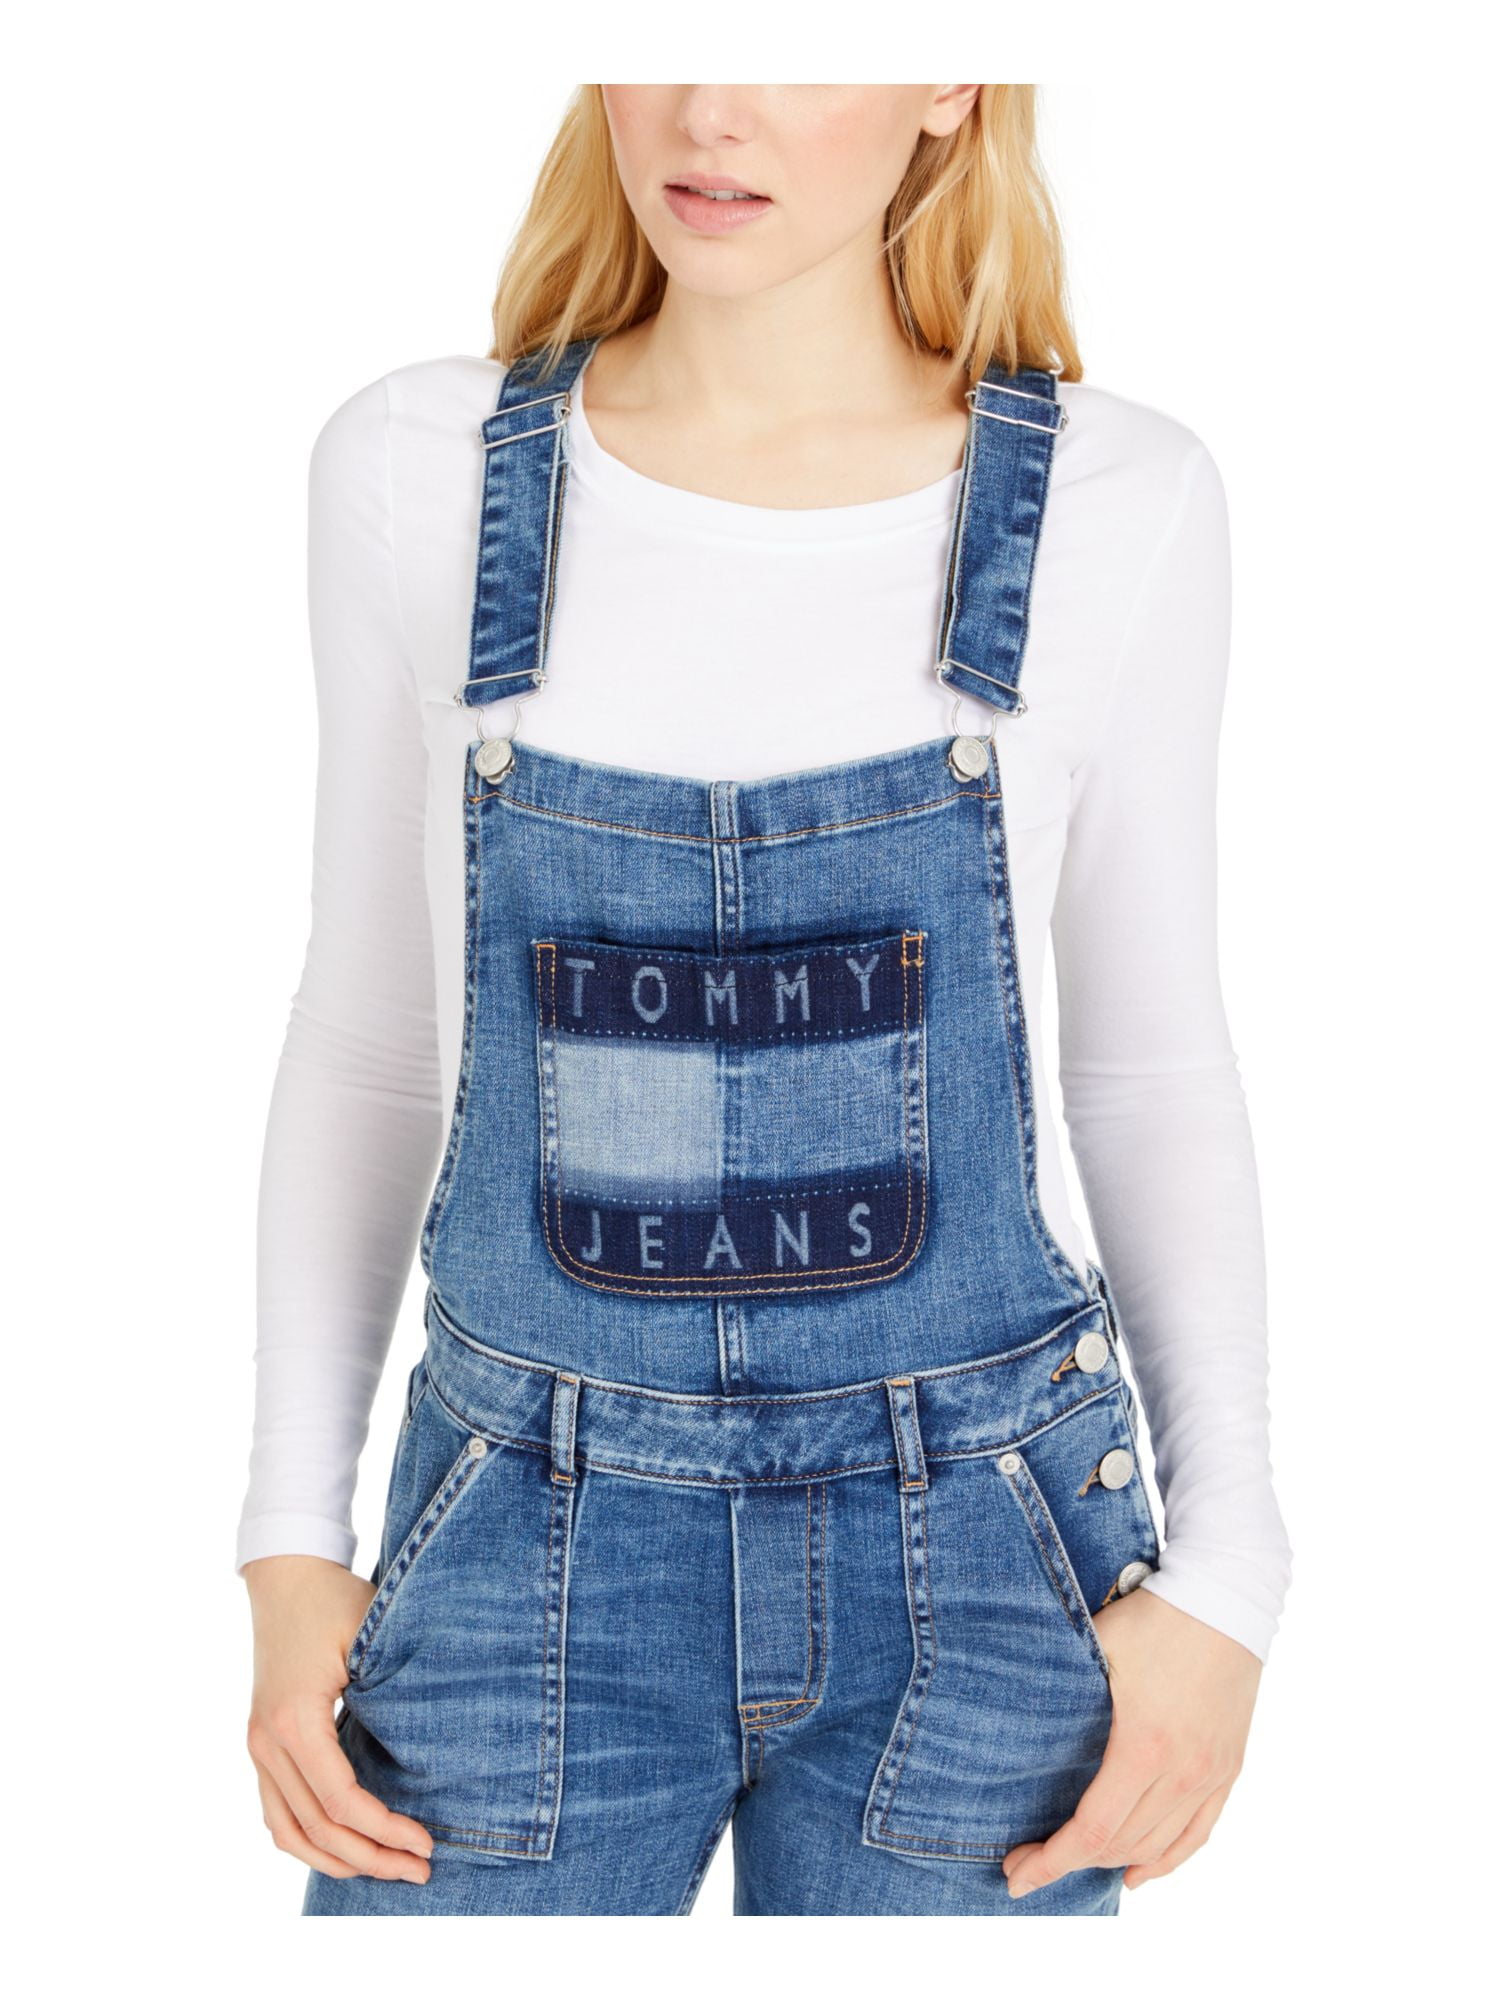 TOMMY JEANS Womens Blue Denim Distressed Pocketed Bib Overalls